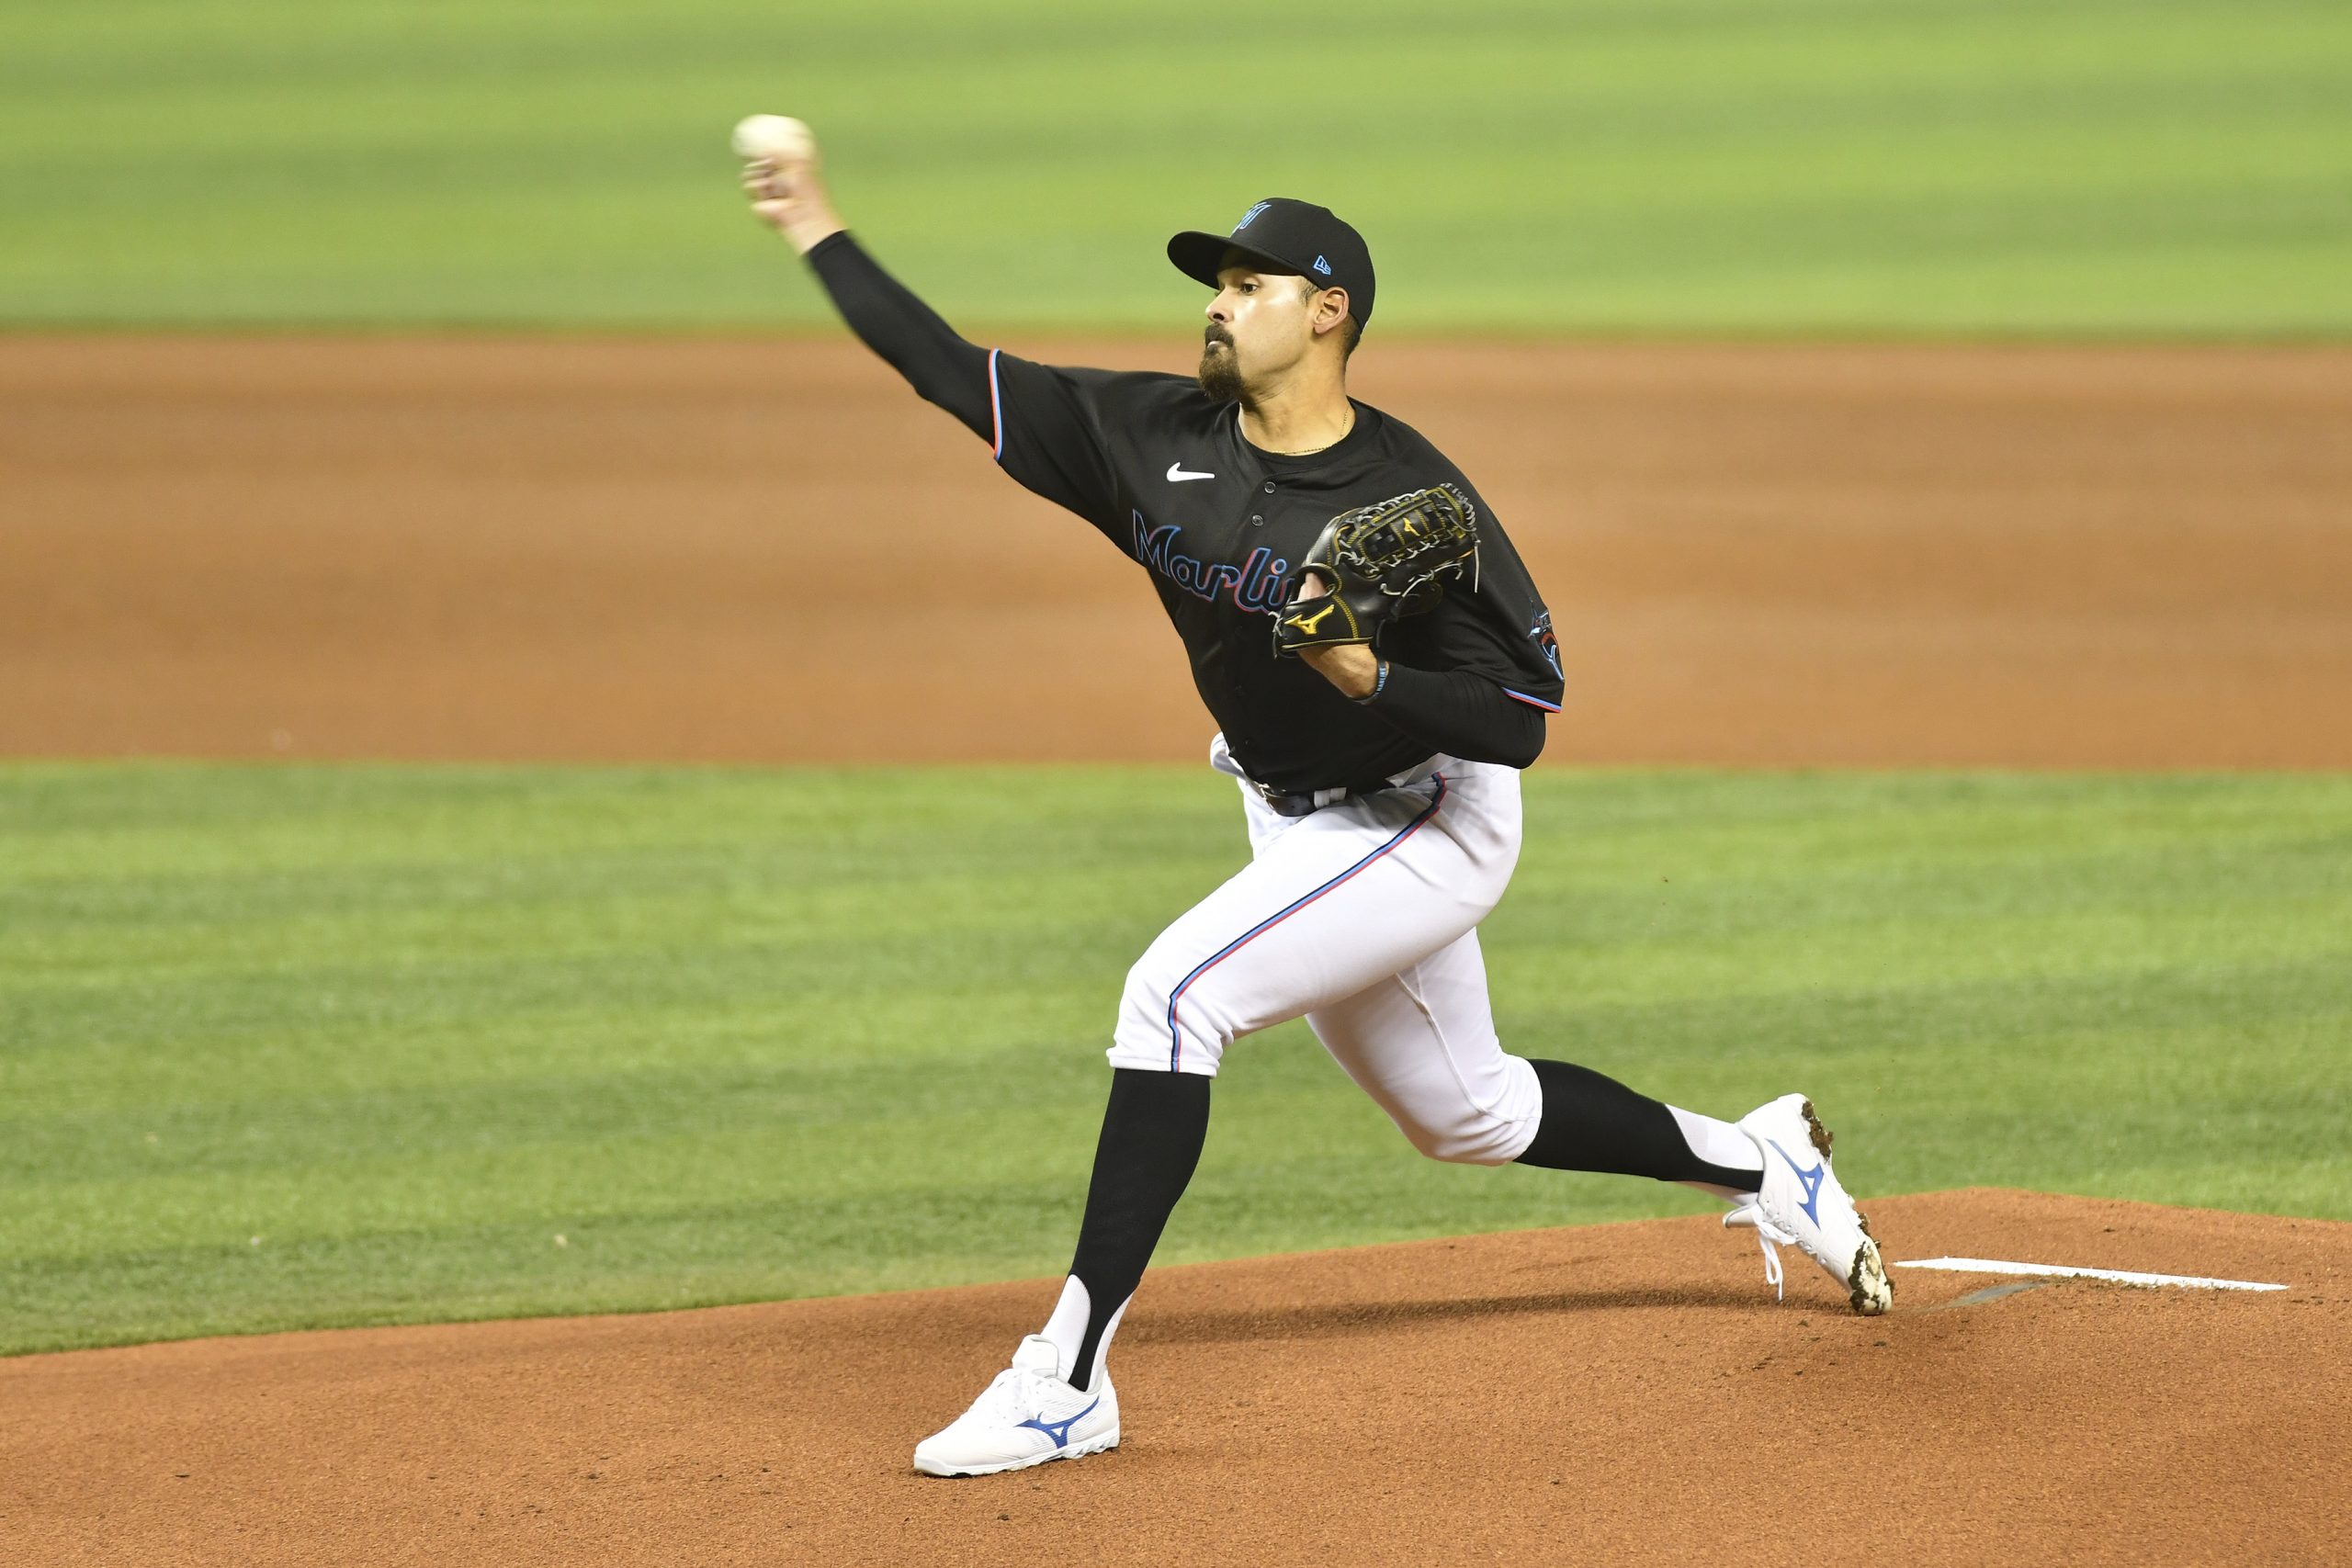 Pablo Lopez made his debut with Marilyn in the 2021 season